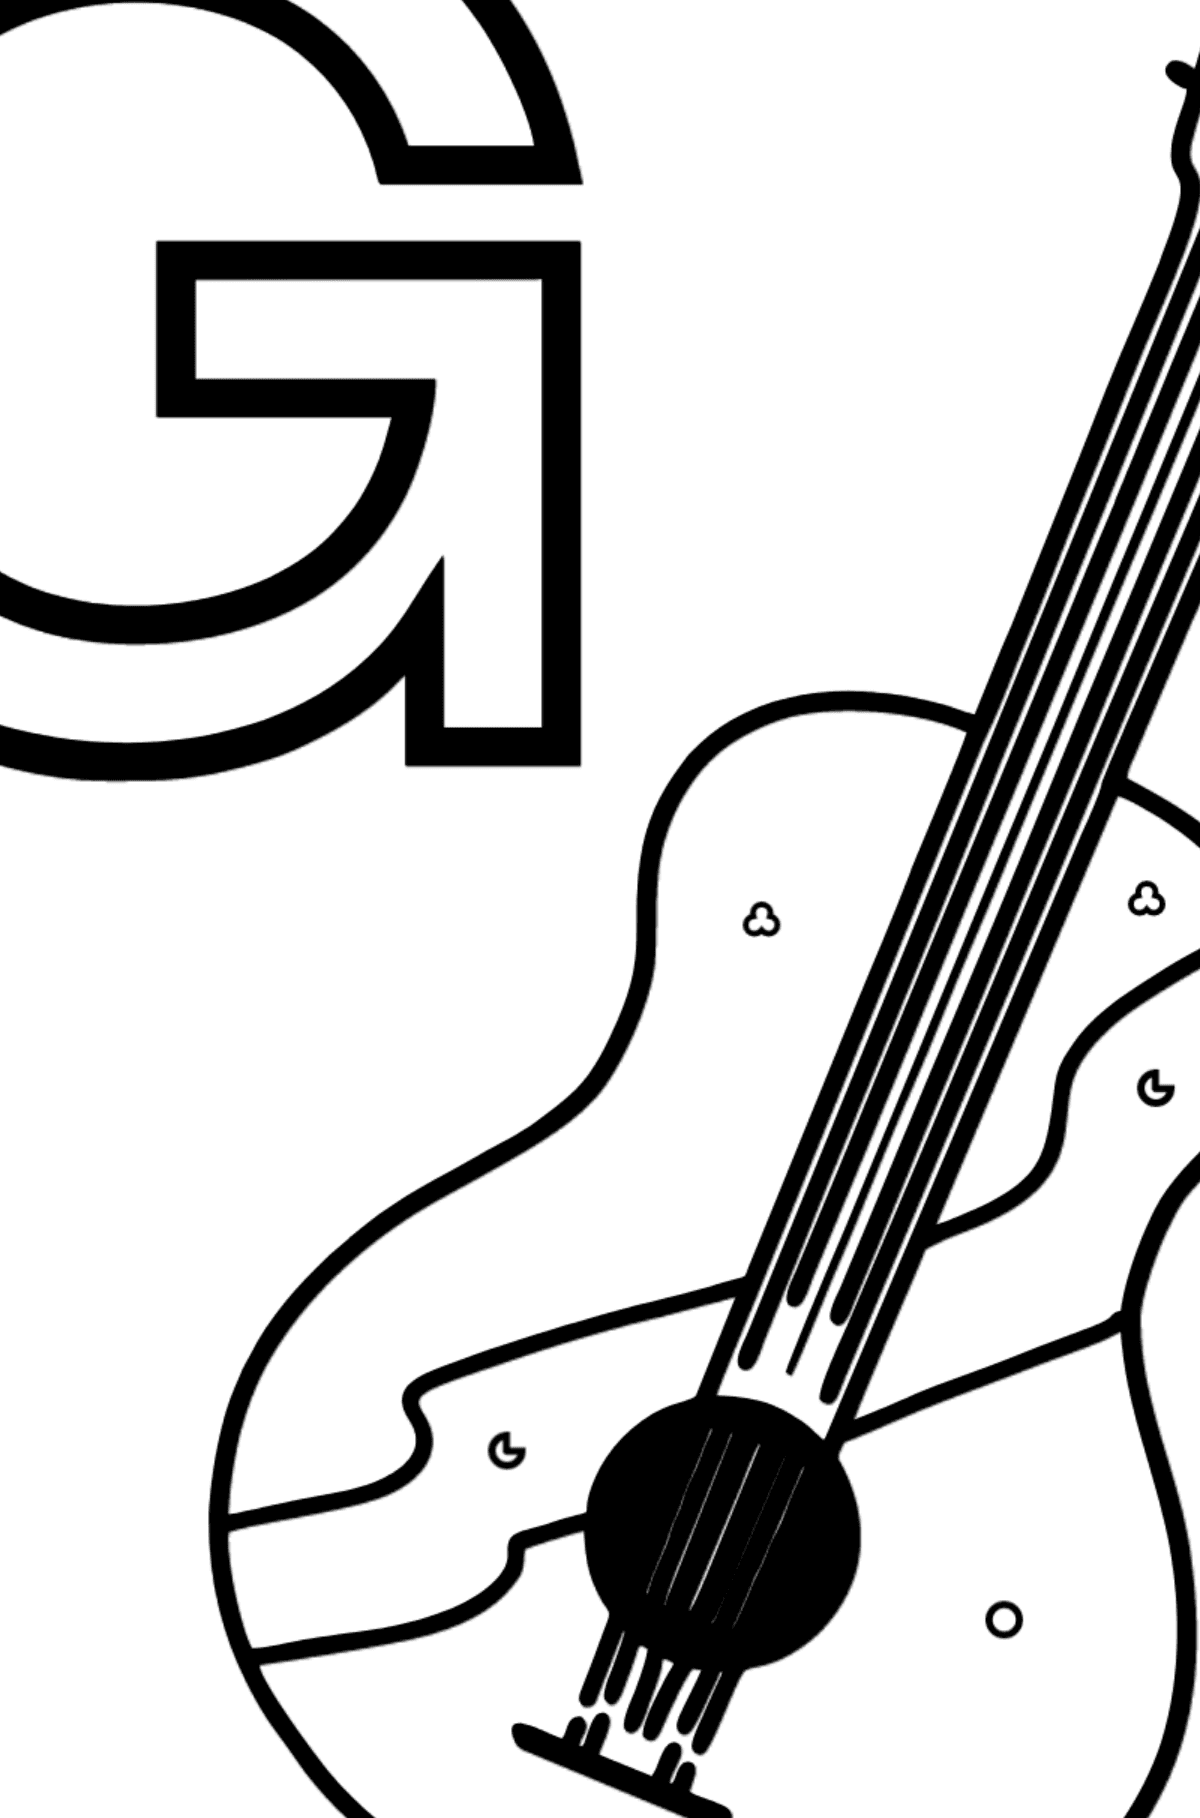 Spanish Letter G coloring pages - GUITARRA - Coloring by Geometric Shapes for Kids